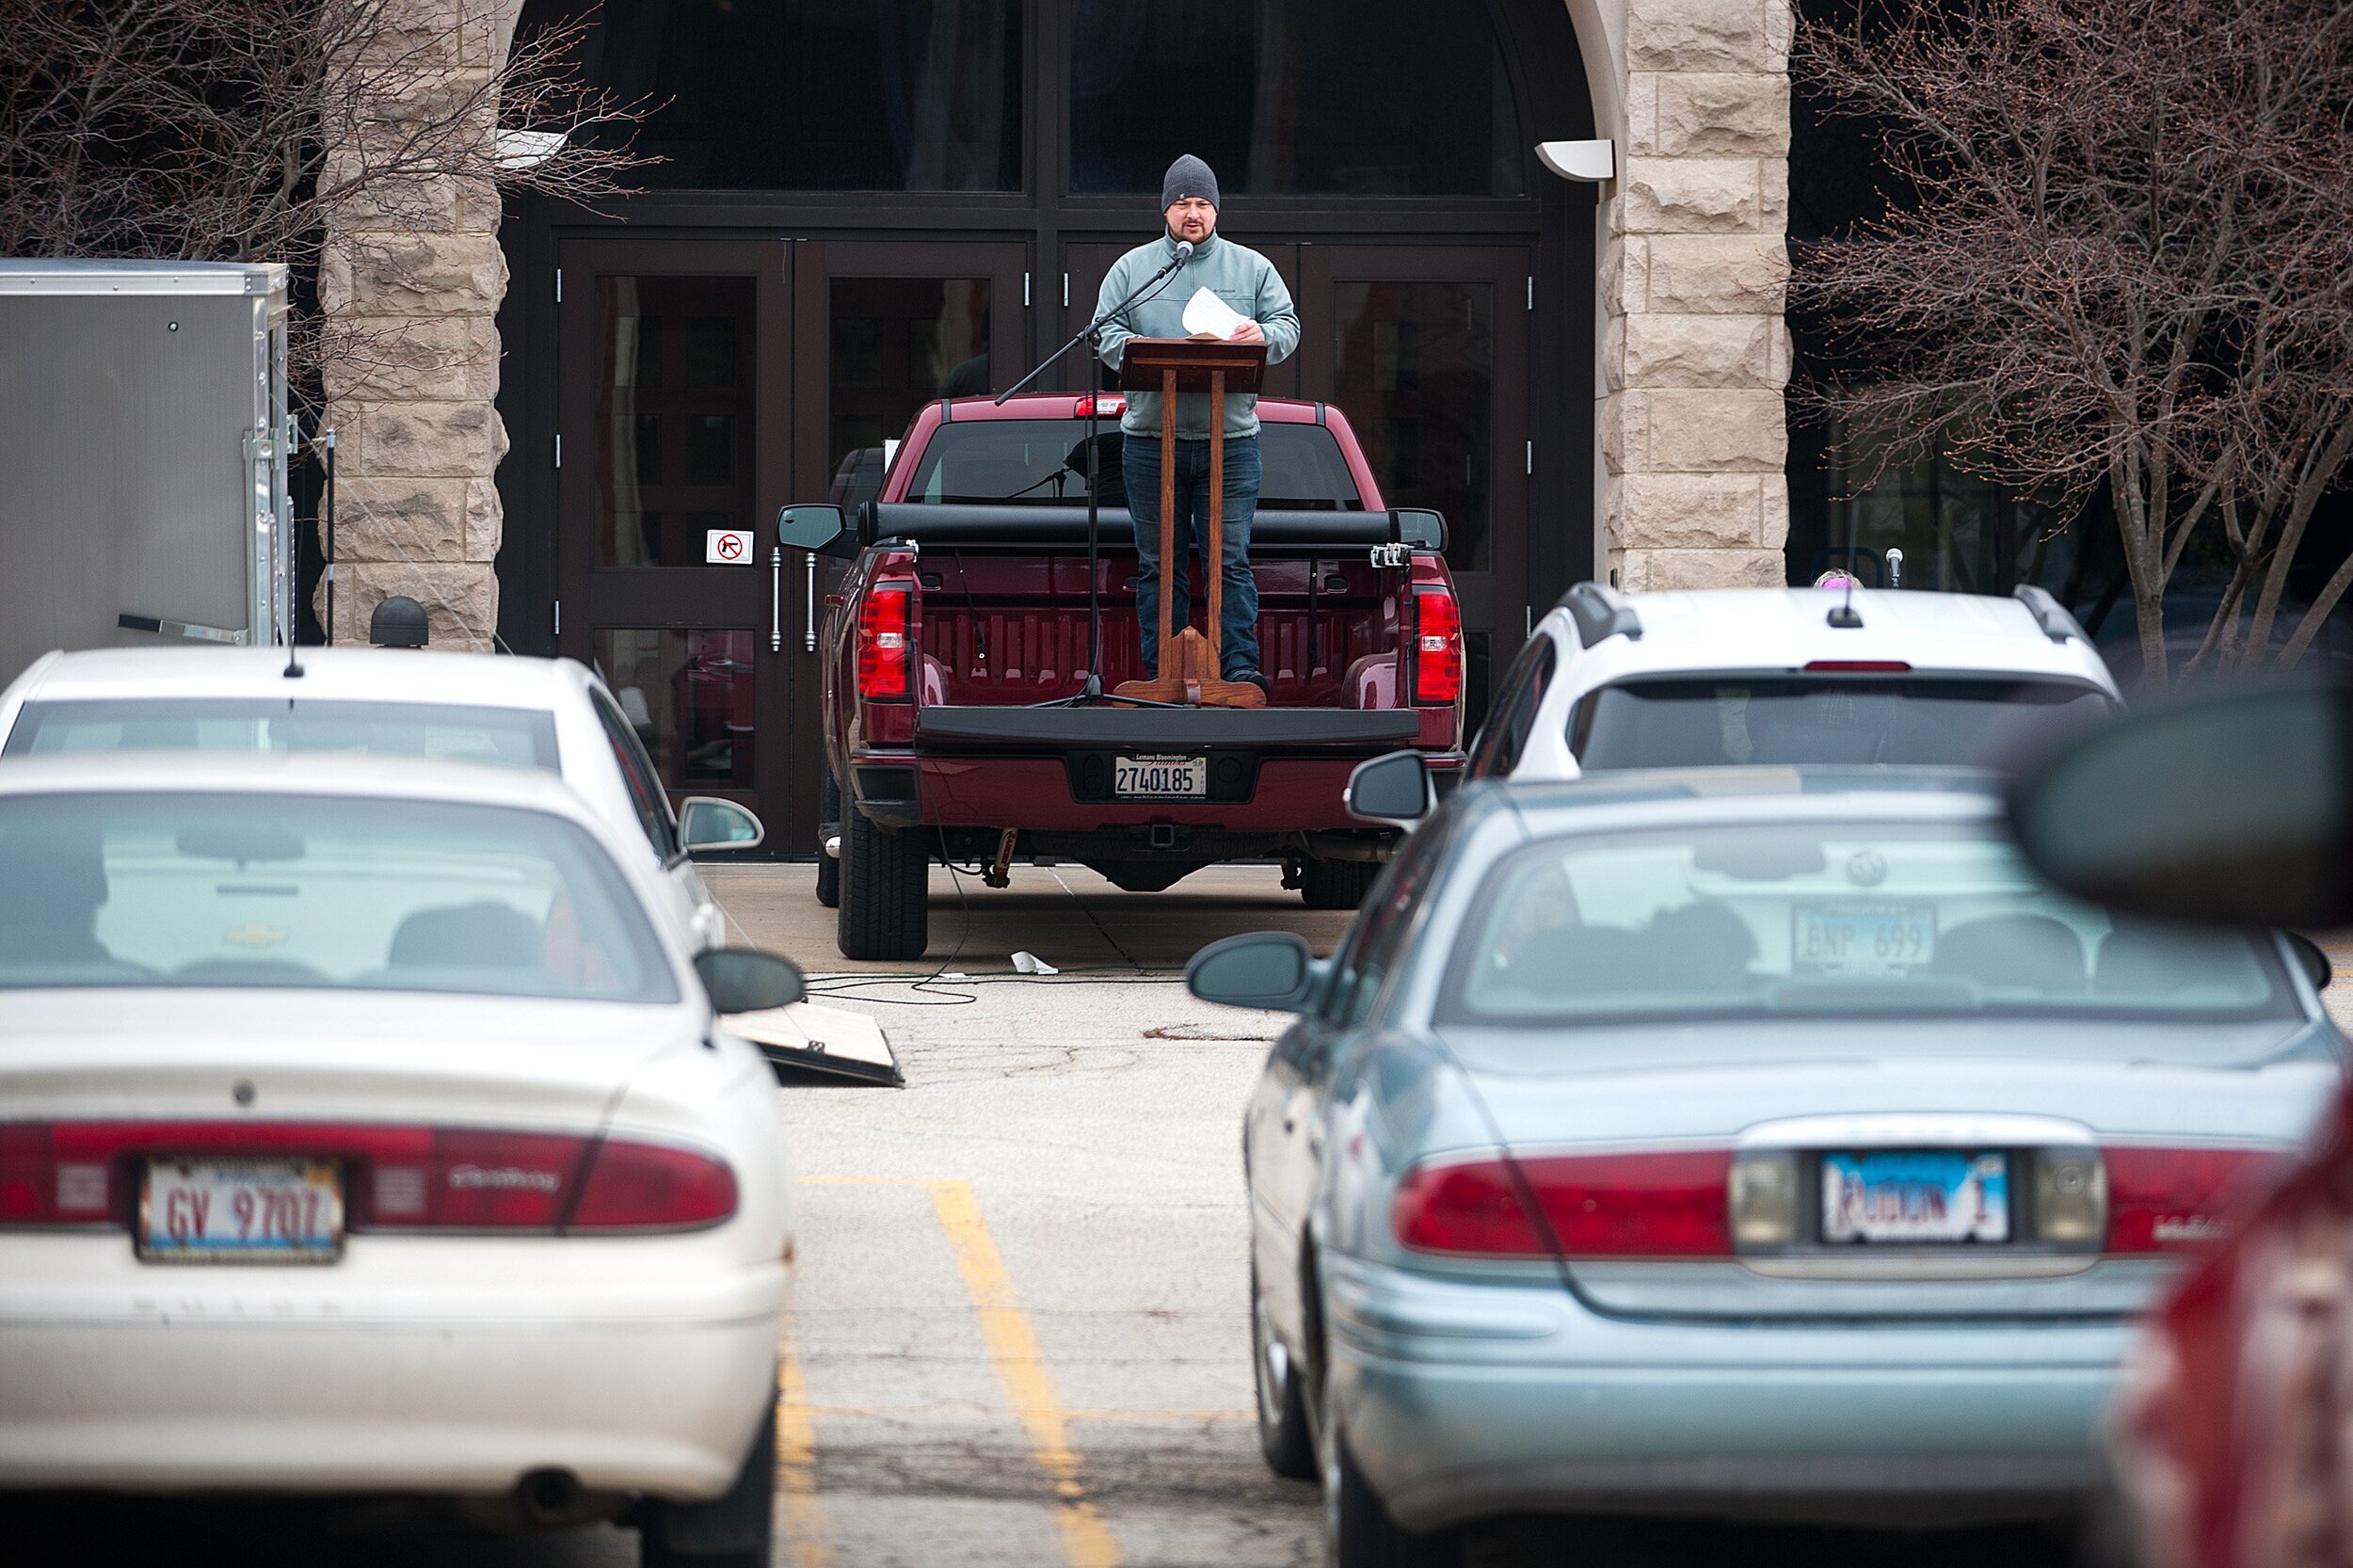  The Rev. Trey Haddon, senior pastor at Second Presbyterian Church, delivers his sermon on Sunday, March 22, 2020, during a drive-in worship service outside the church in Bloomington, Illinois. Due to the COVID-19 pandemic, the church is finding new 